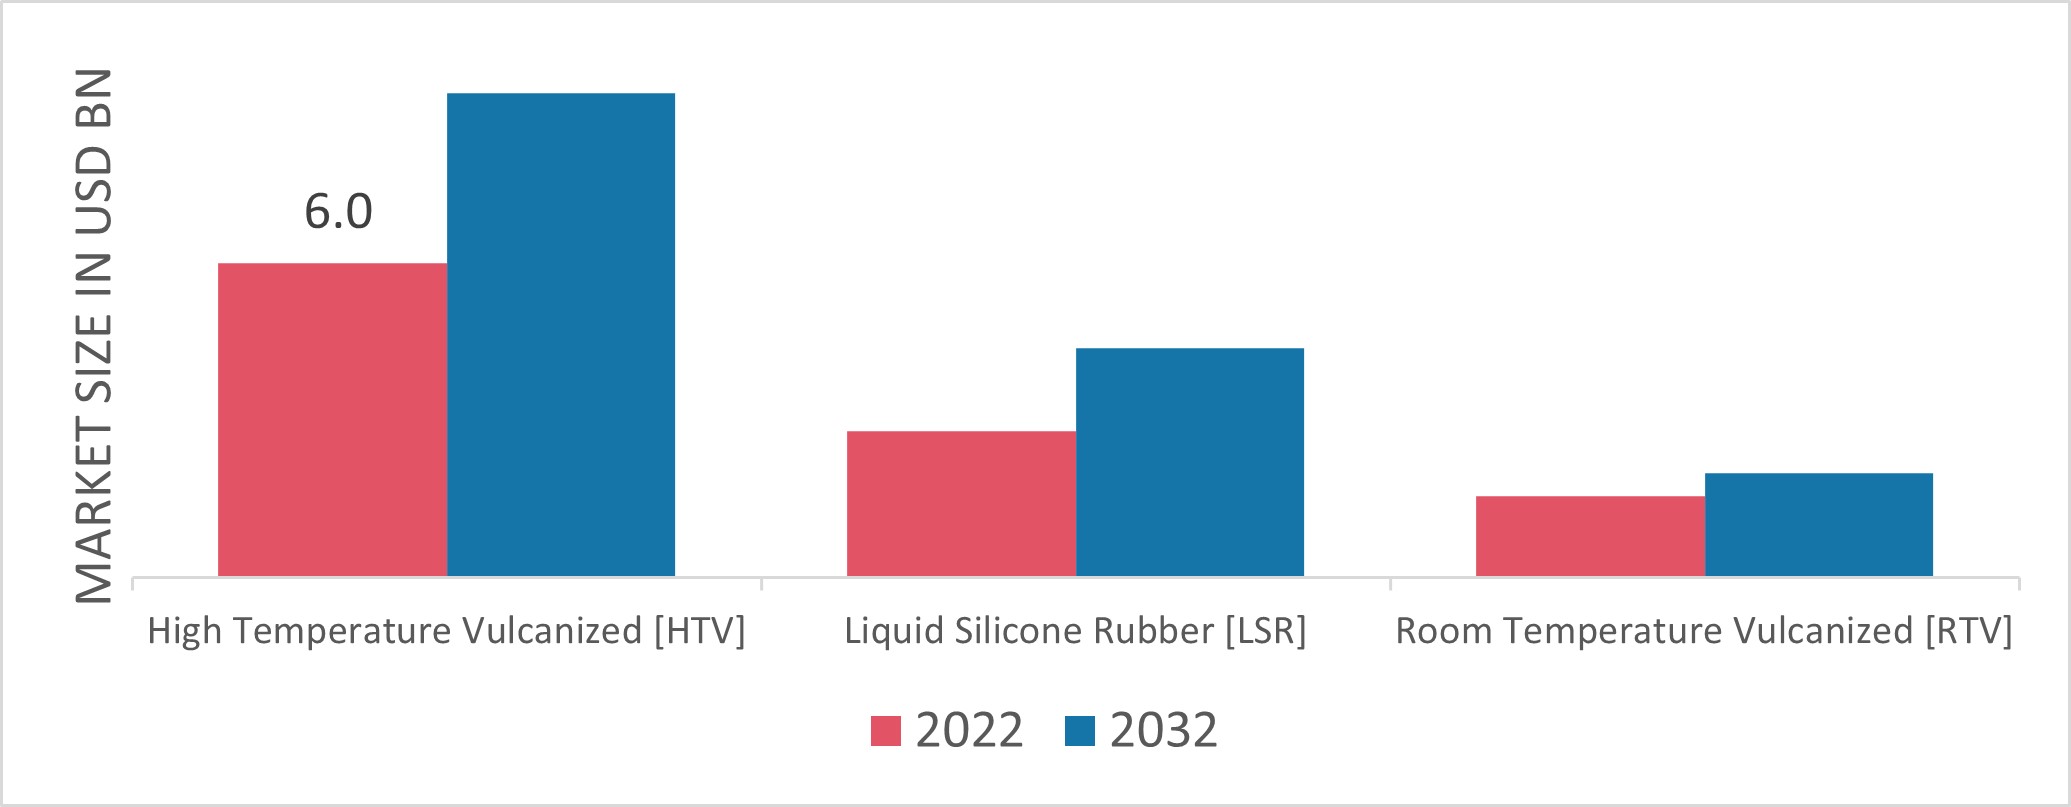 Silicone Elastomers Market, by Type, 2022 & 2032